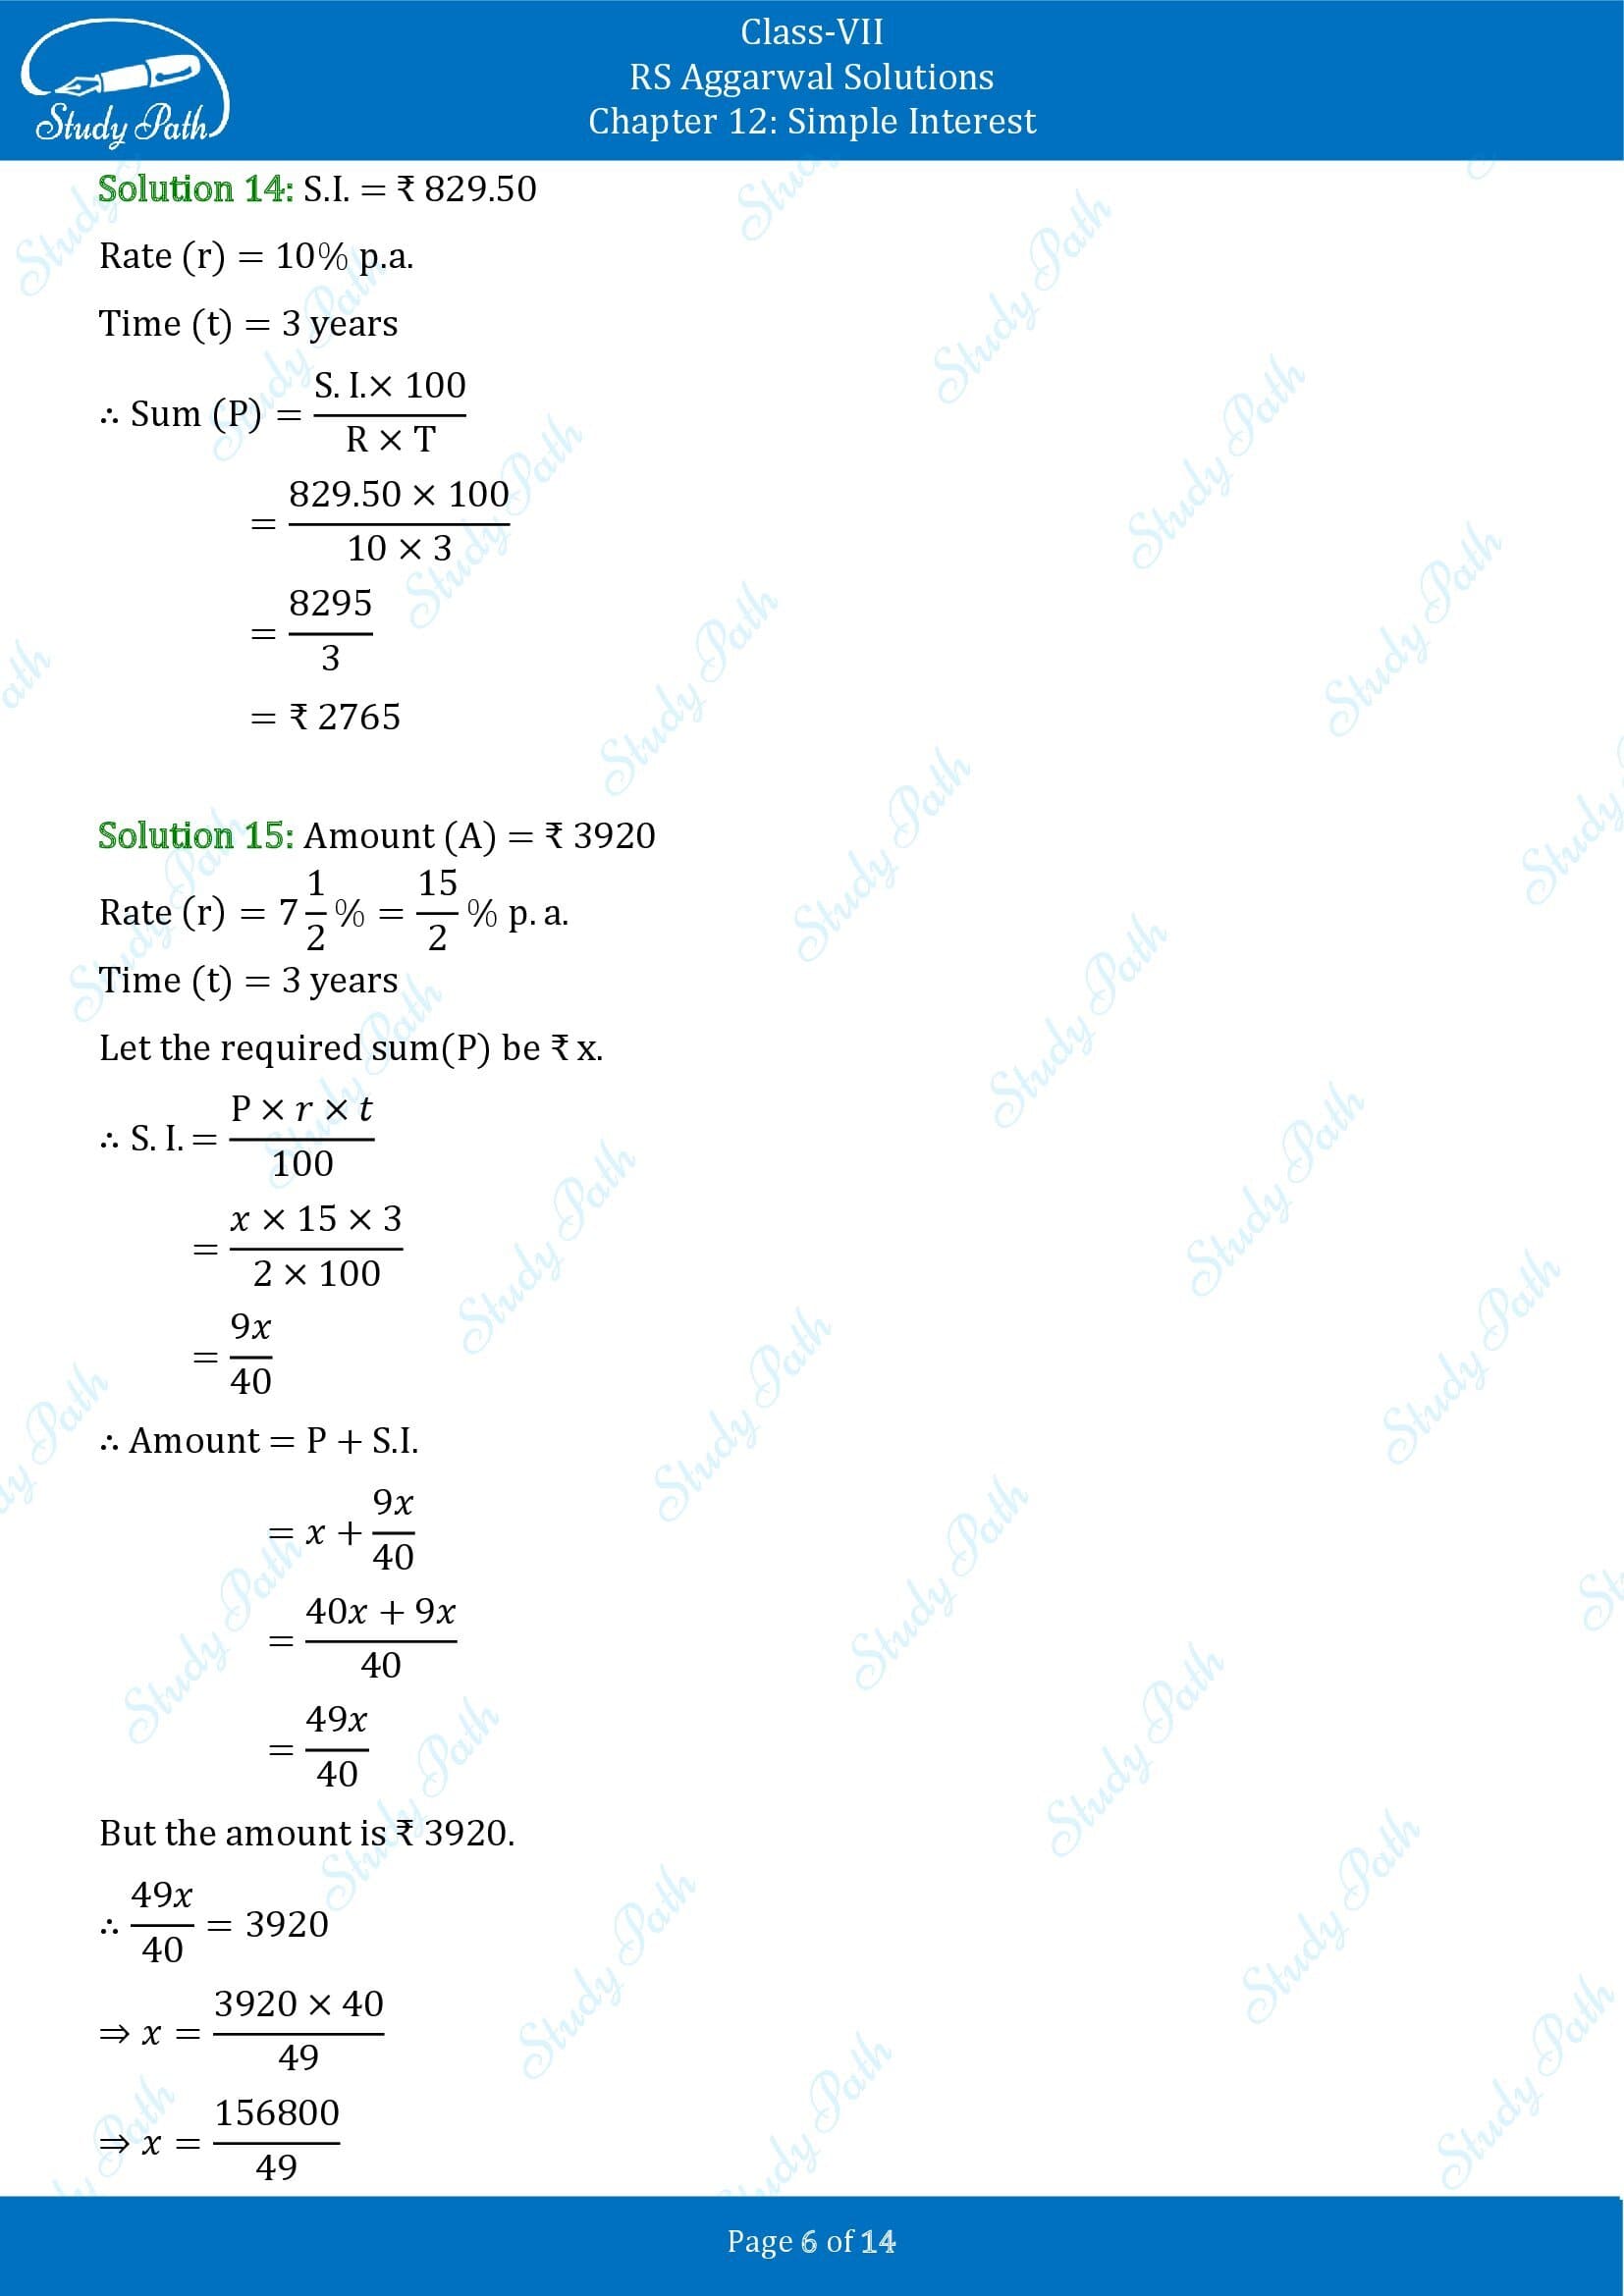 RS Aggarwal Solutions Class 7 Chapter 12 Simple Interest Exercise 12A 00006